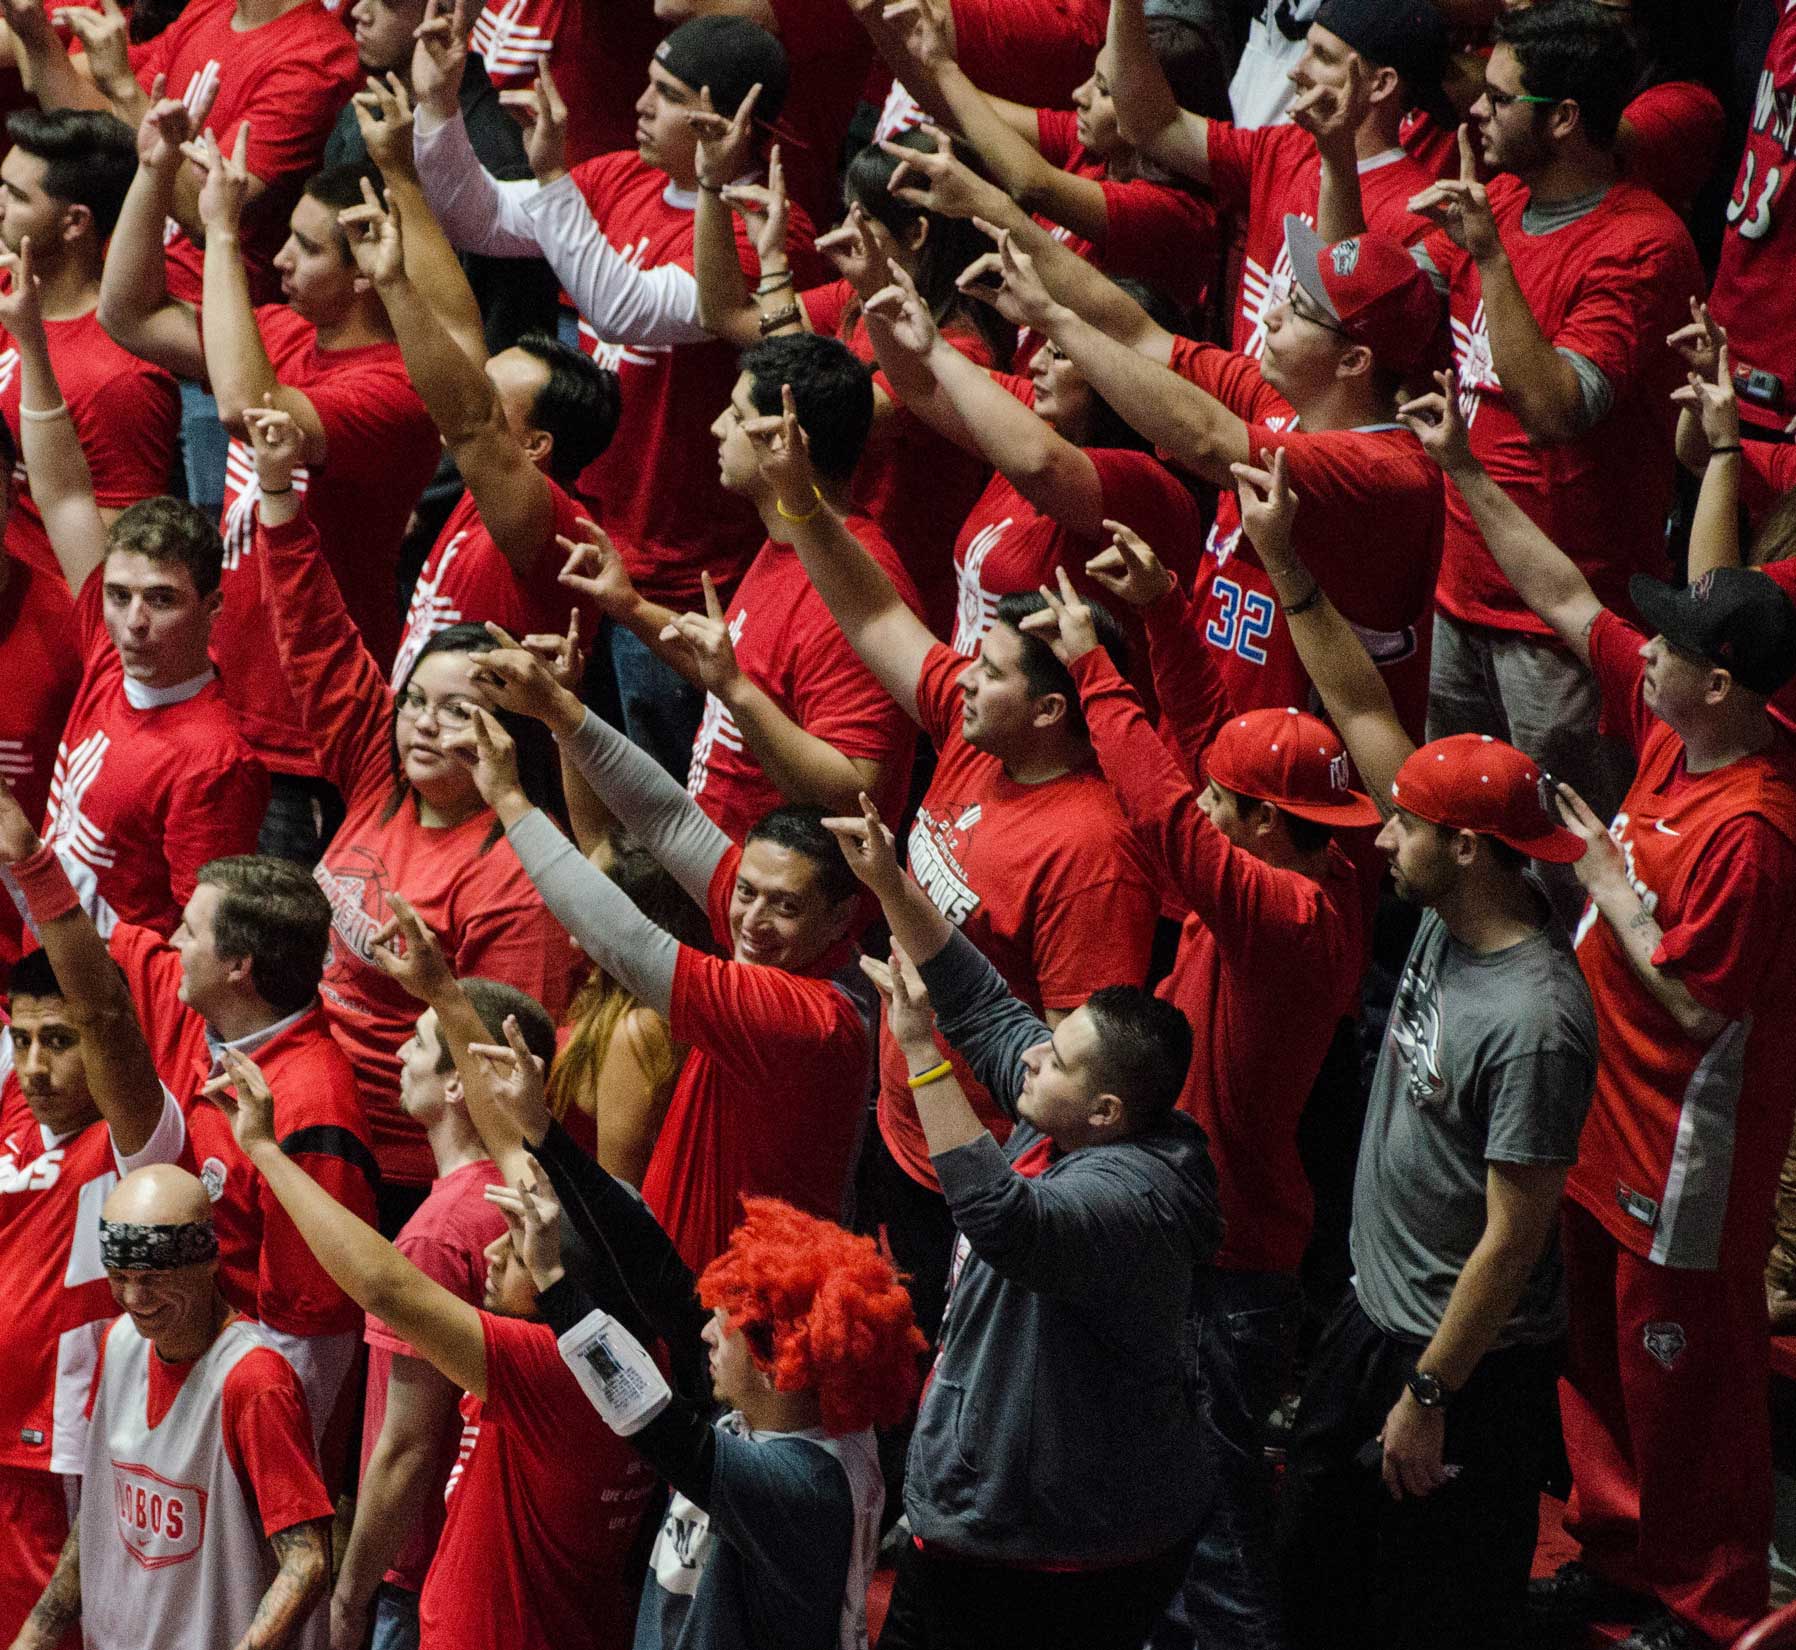 UNM Students cheering at The Pit